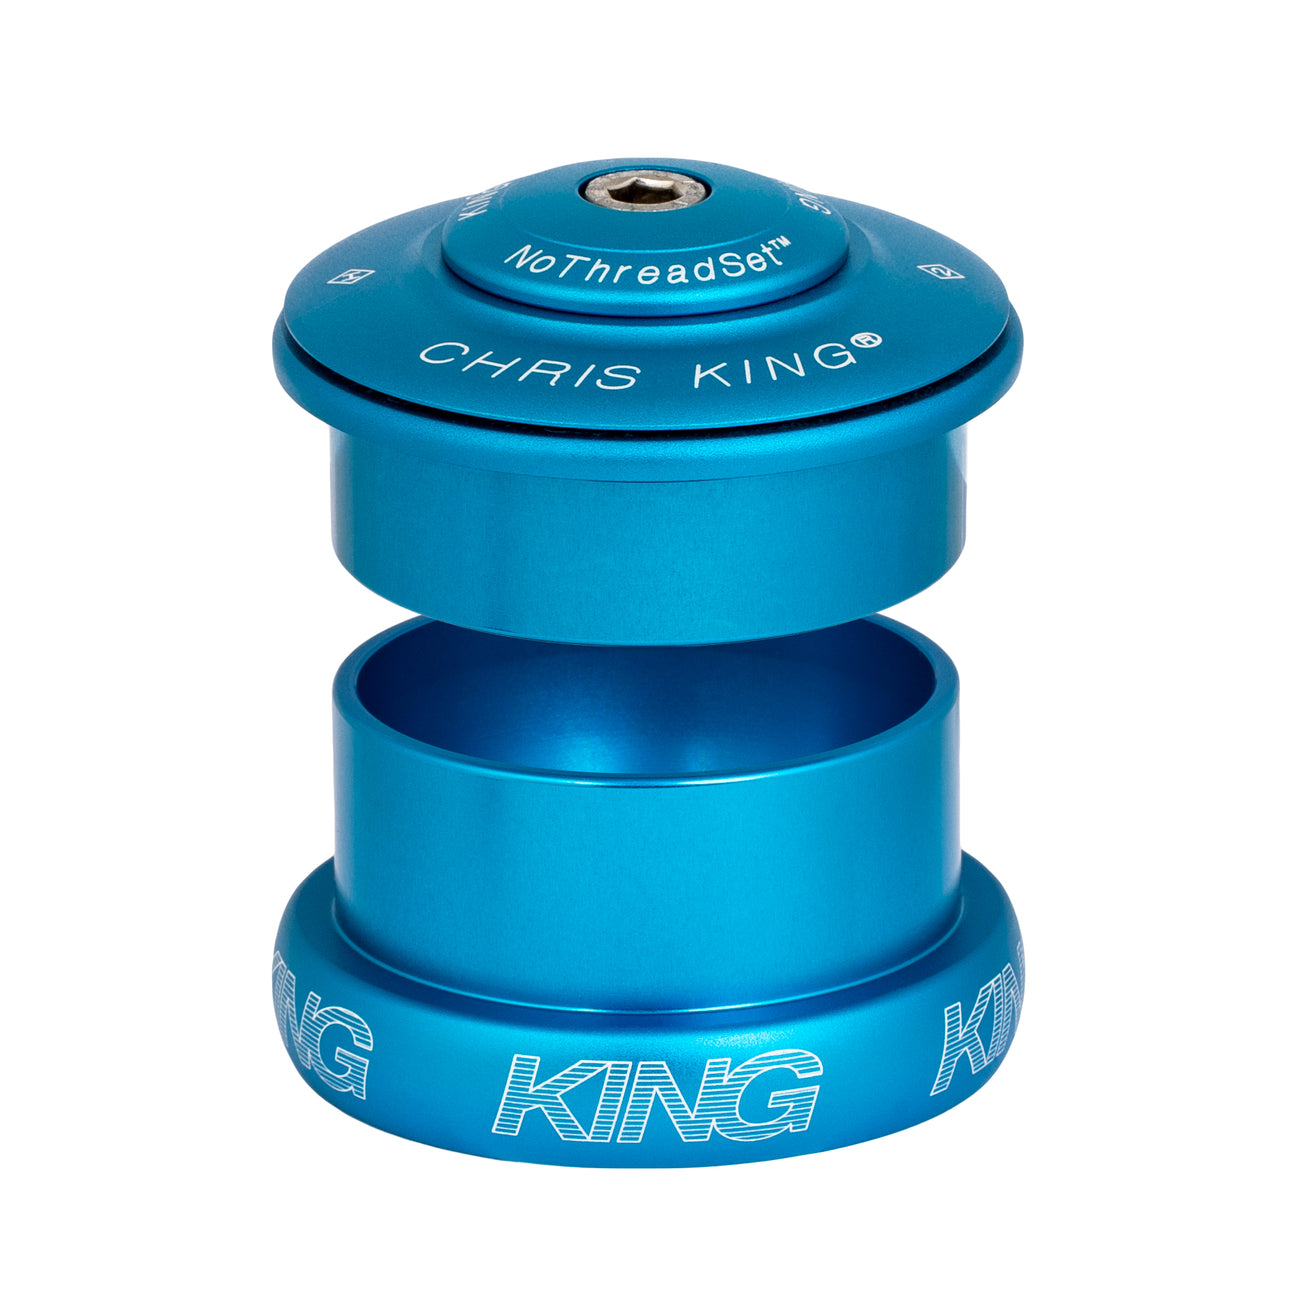 Chris King Inset 5 headset in matte turquoise